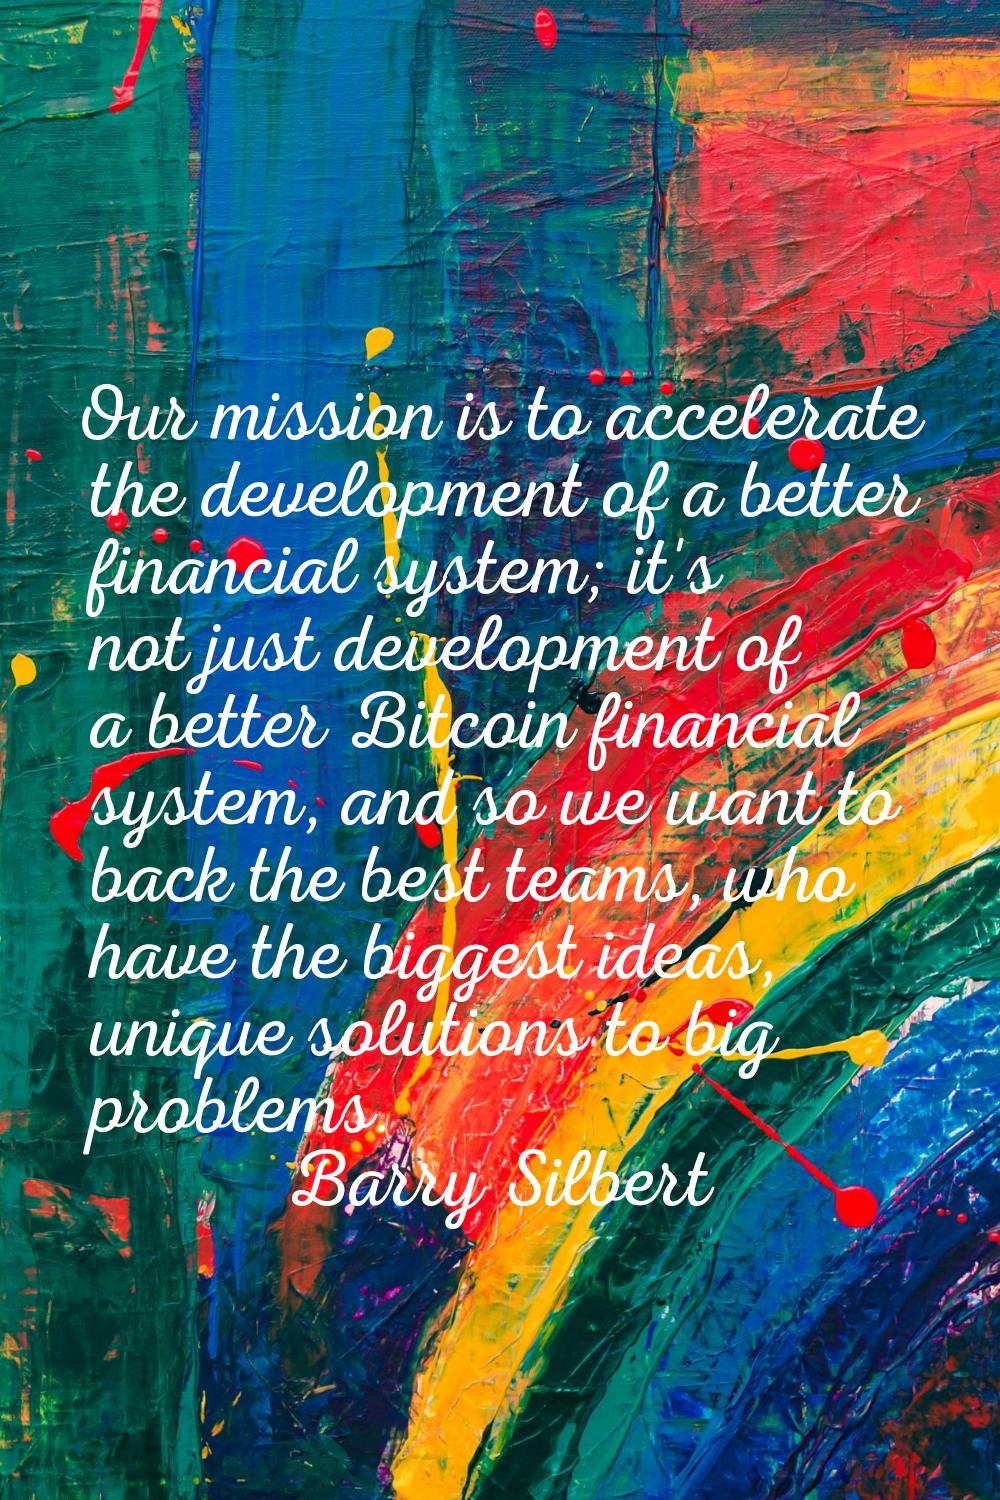 Our mission is to accelerate the development of a better financial system; it's not just developmen